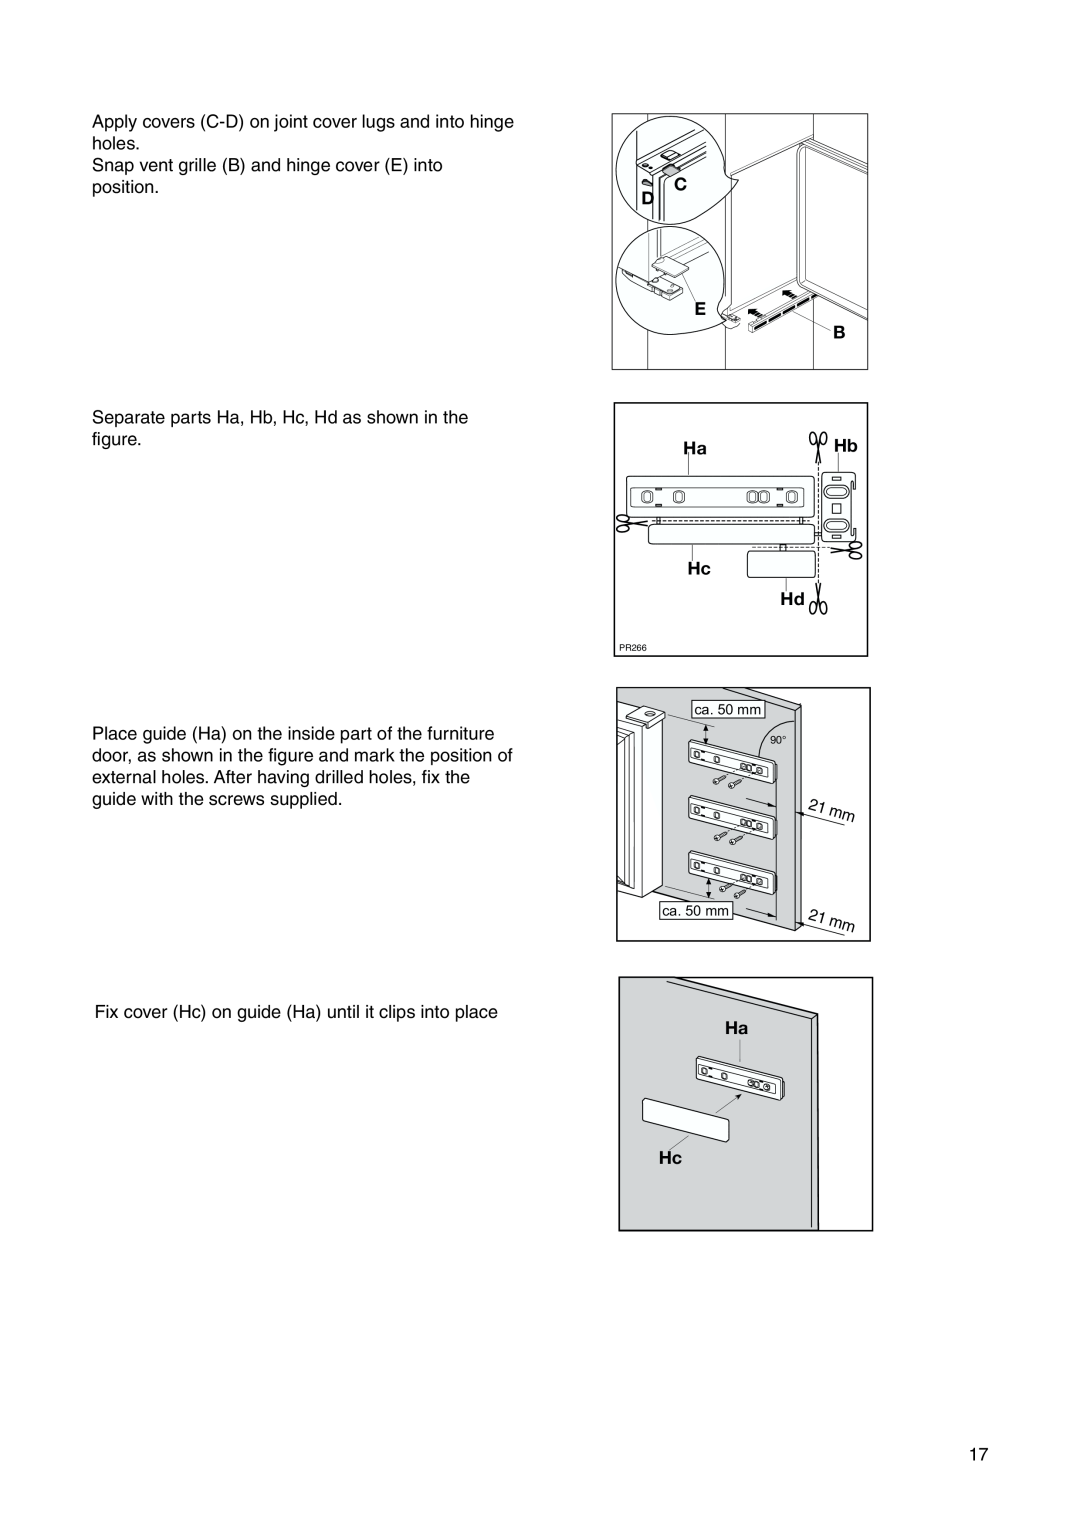 Electrolux EUF 23800 user manual Apply covers C-D on joint cover lugs and into hinge holes 